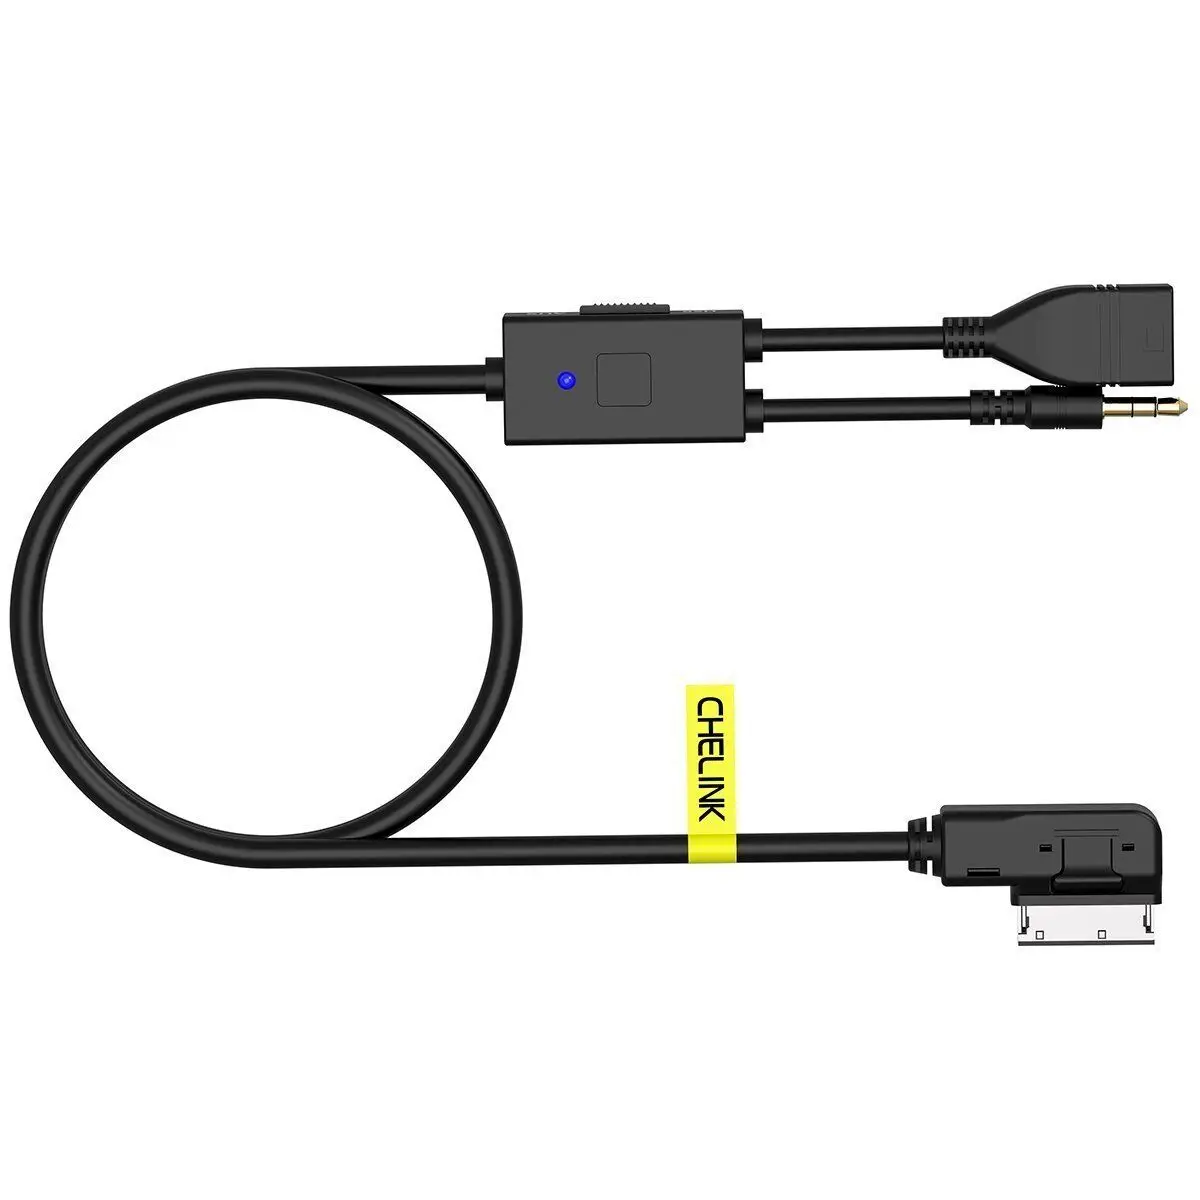 CHELINK MI MMI Audio USB Cable MP3 Music Interface Adapter AUX Media Interface for Mercedes Benz